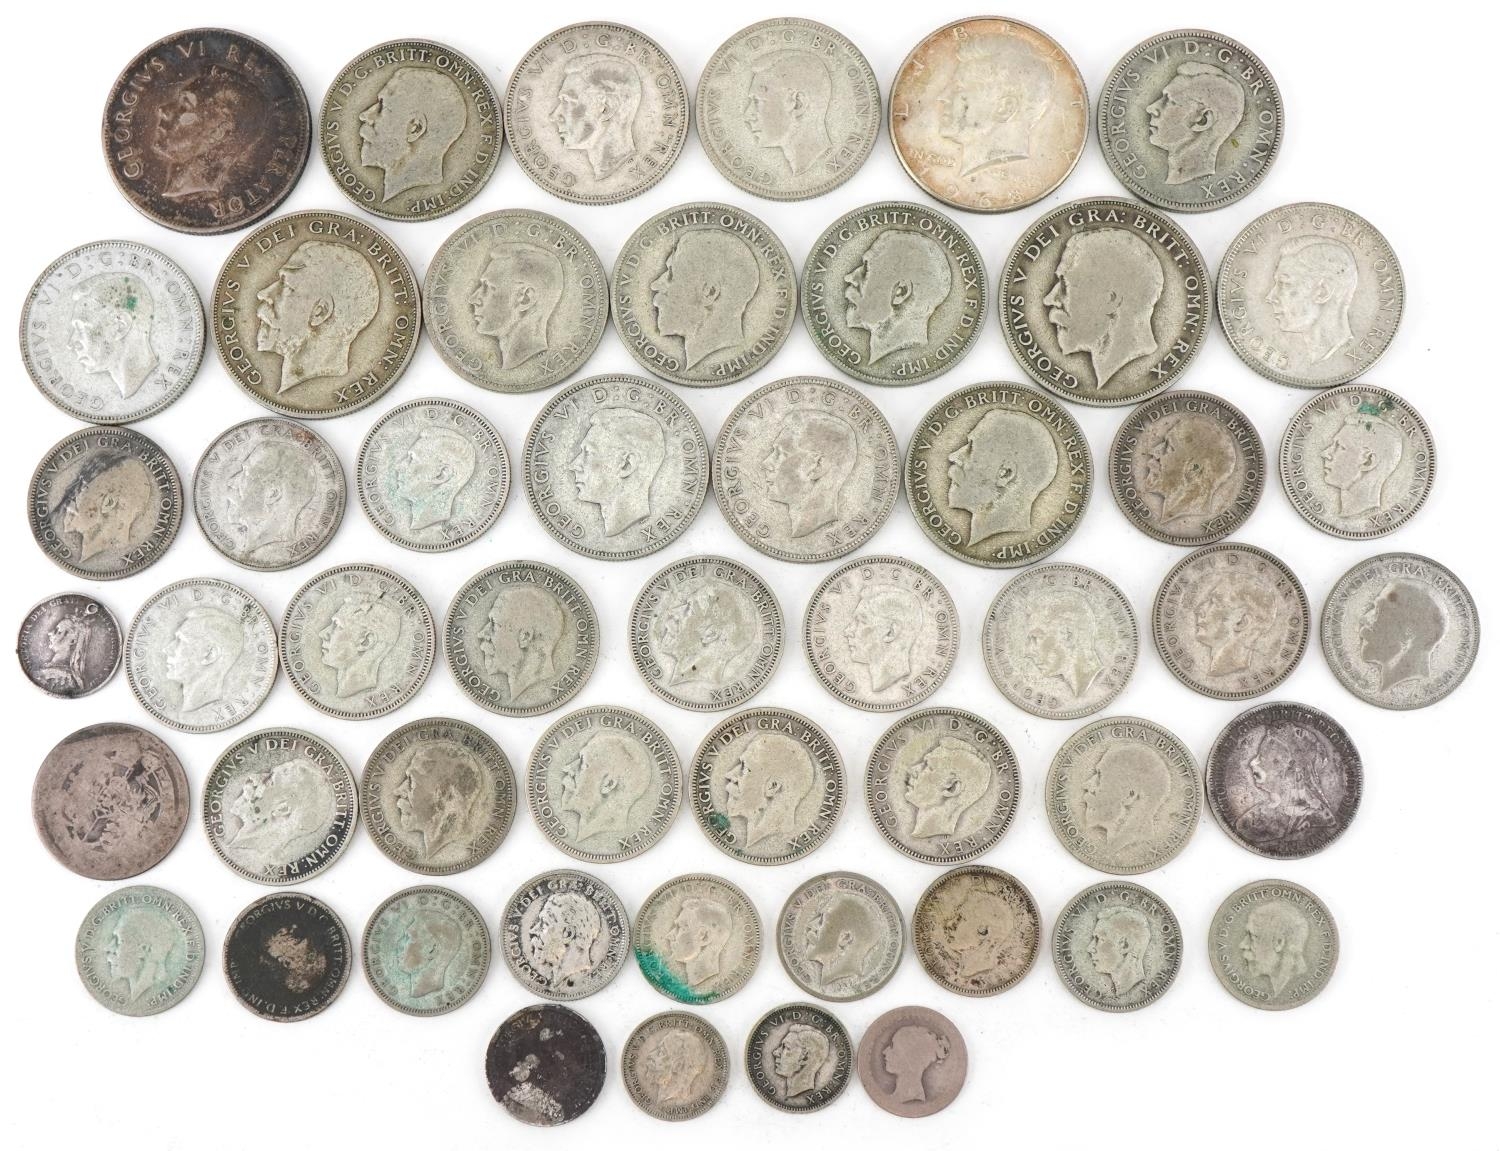 Assorted British coinage to include half crowns, florins and shillings